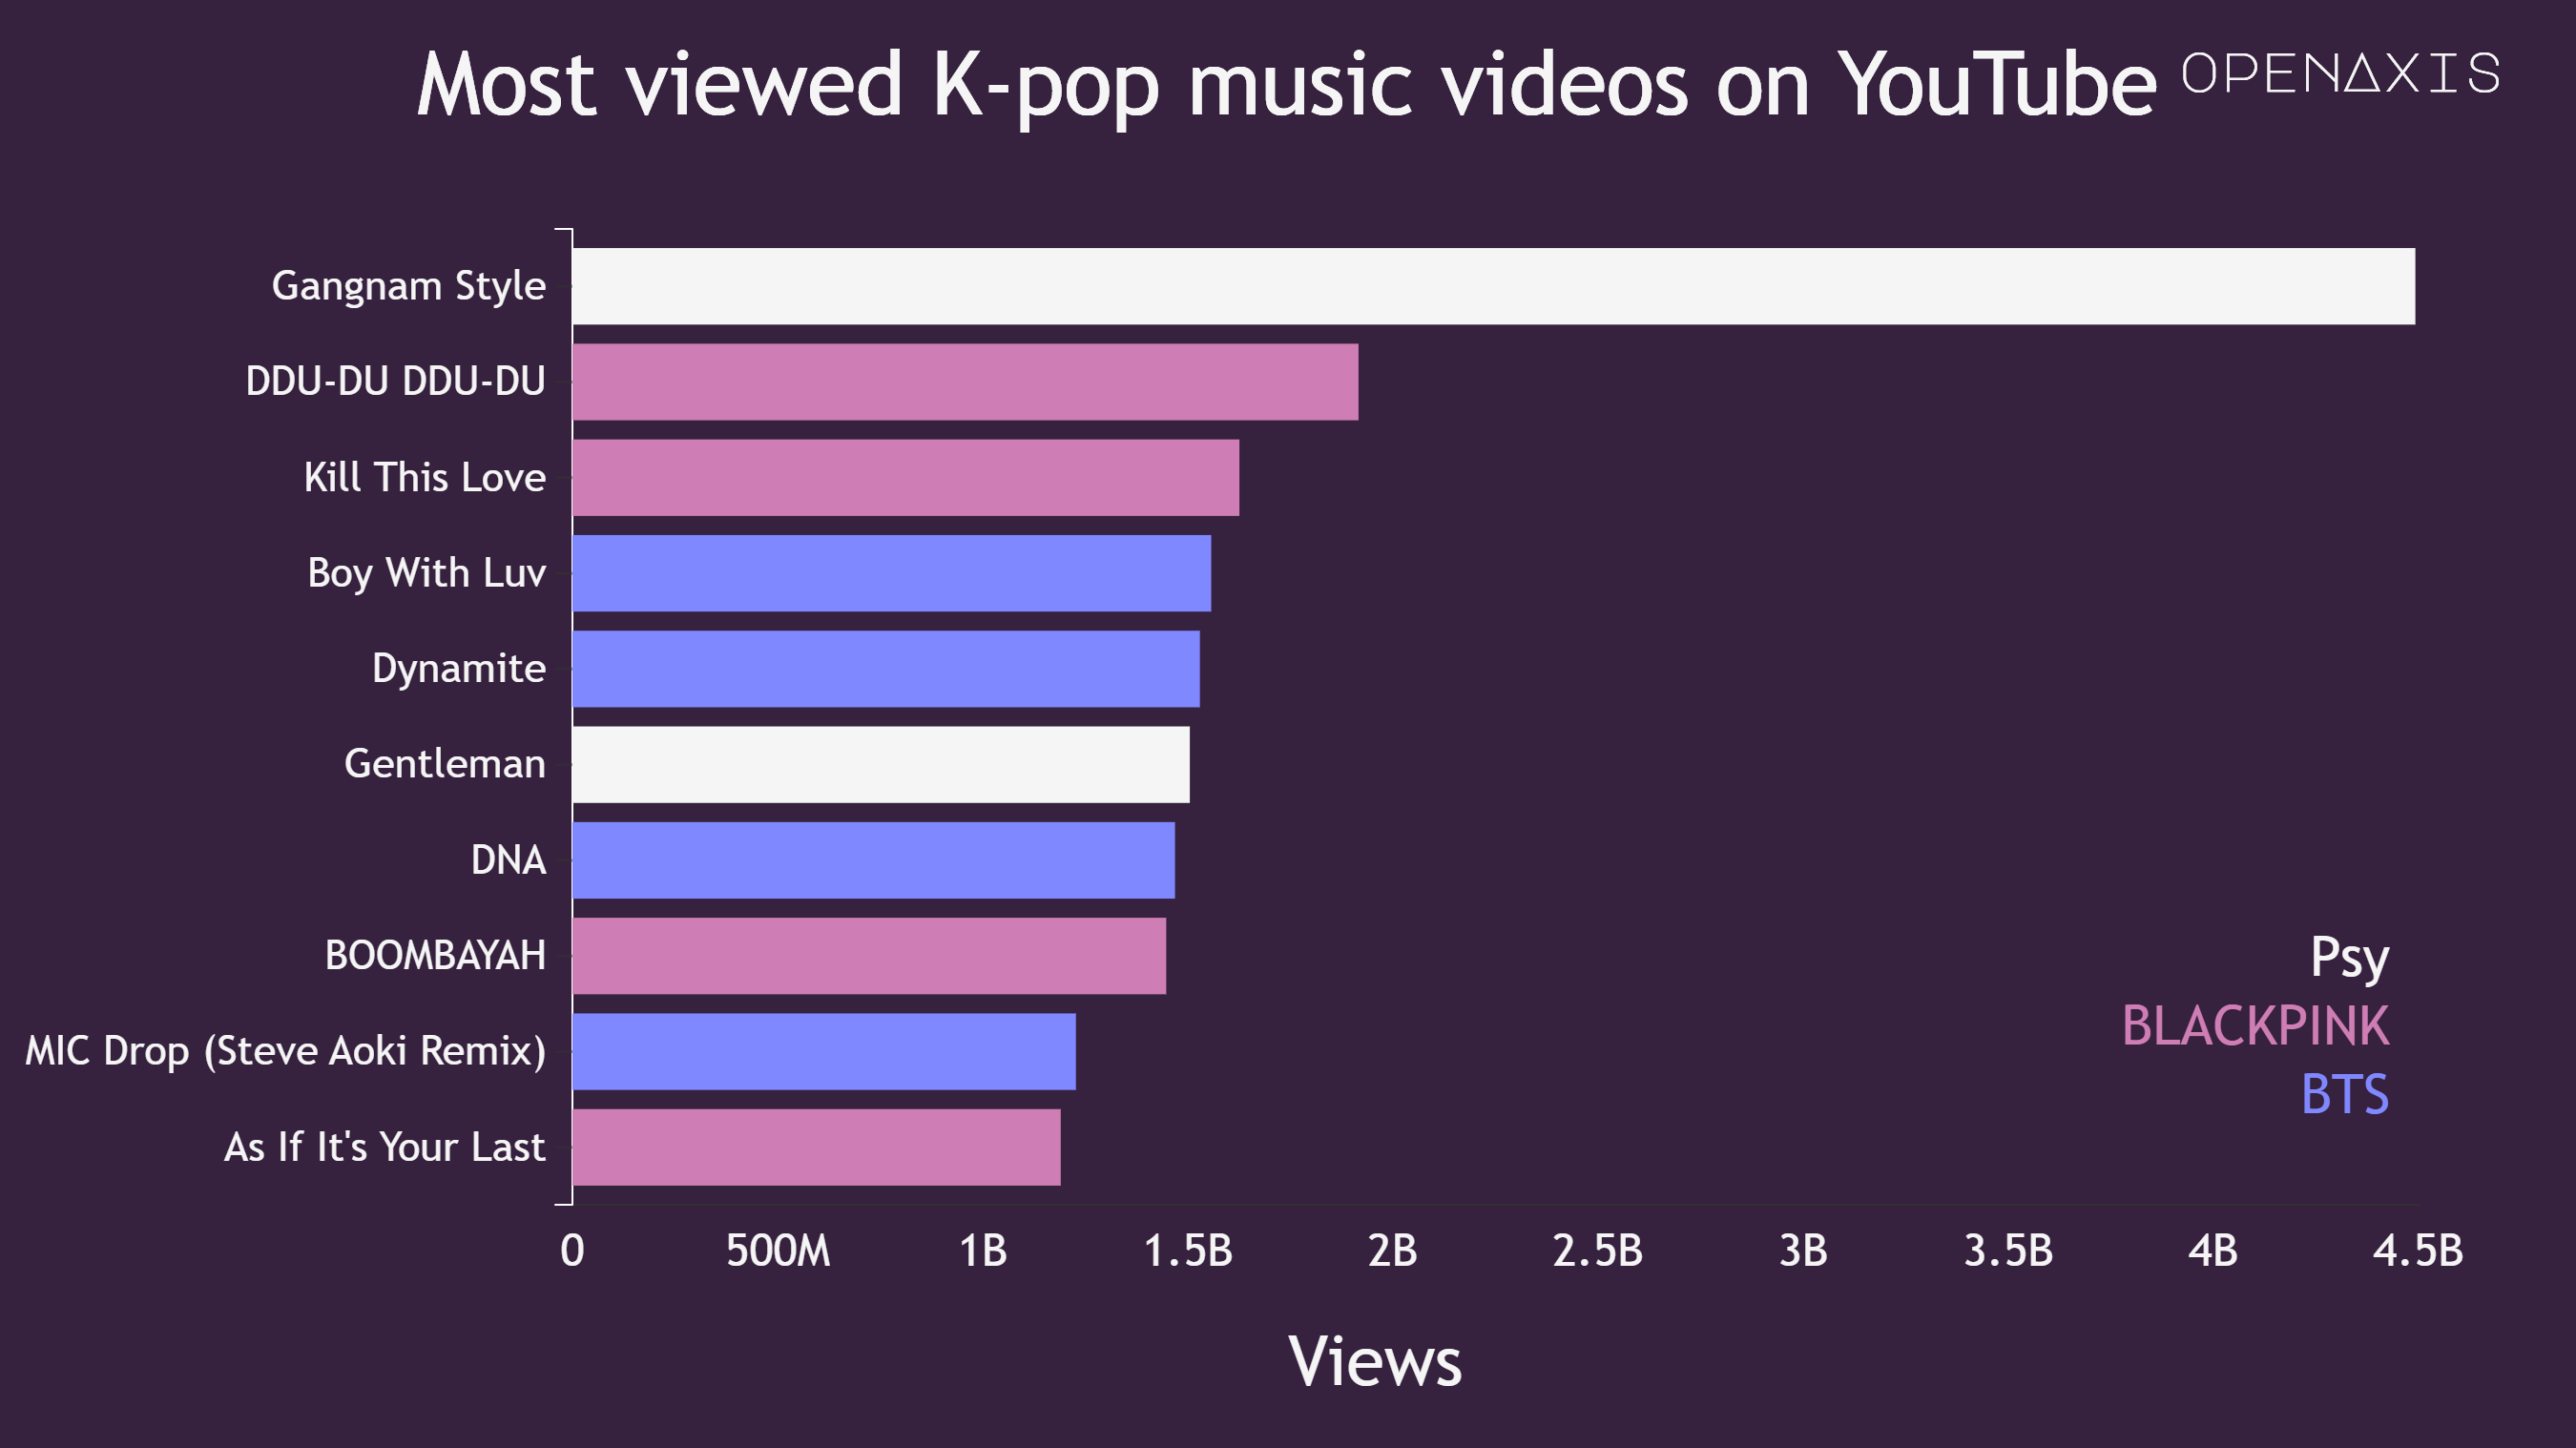 "Most viewed K-pop music videos on YouTube"